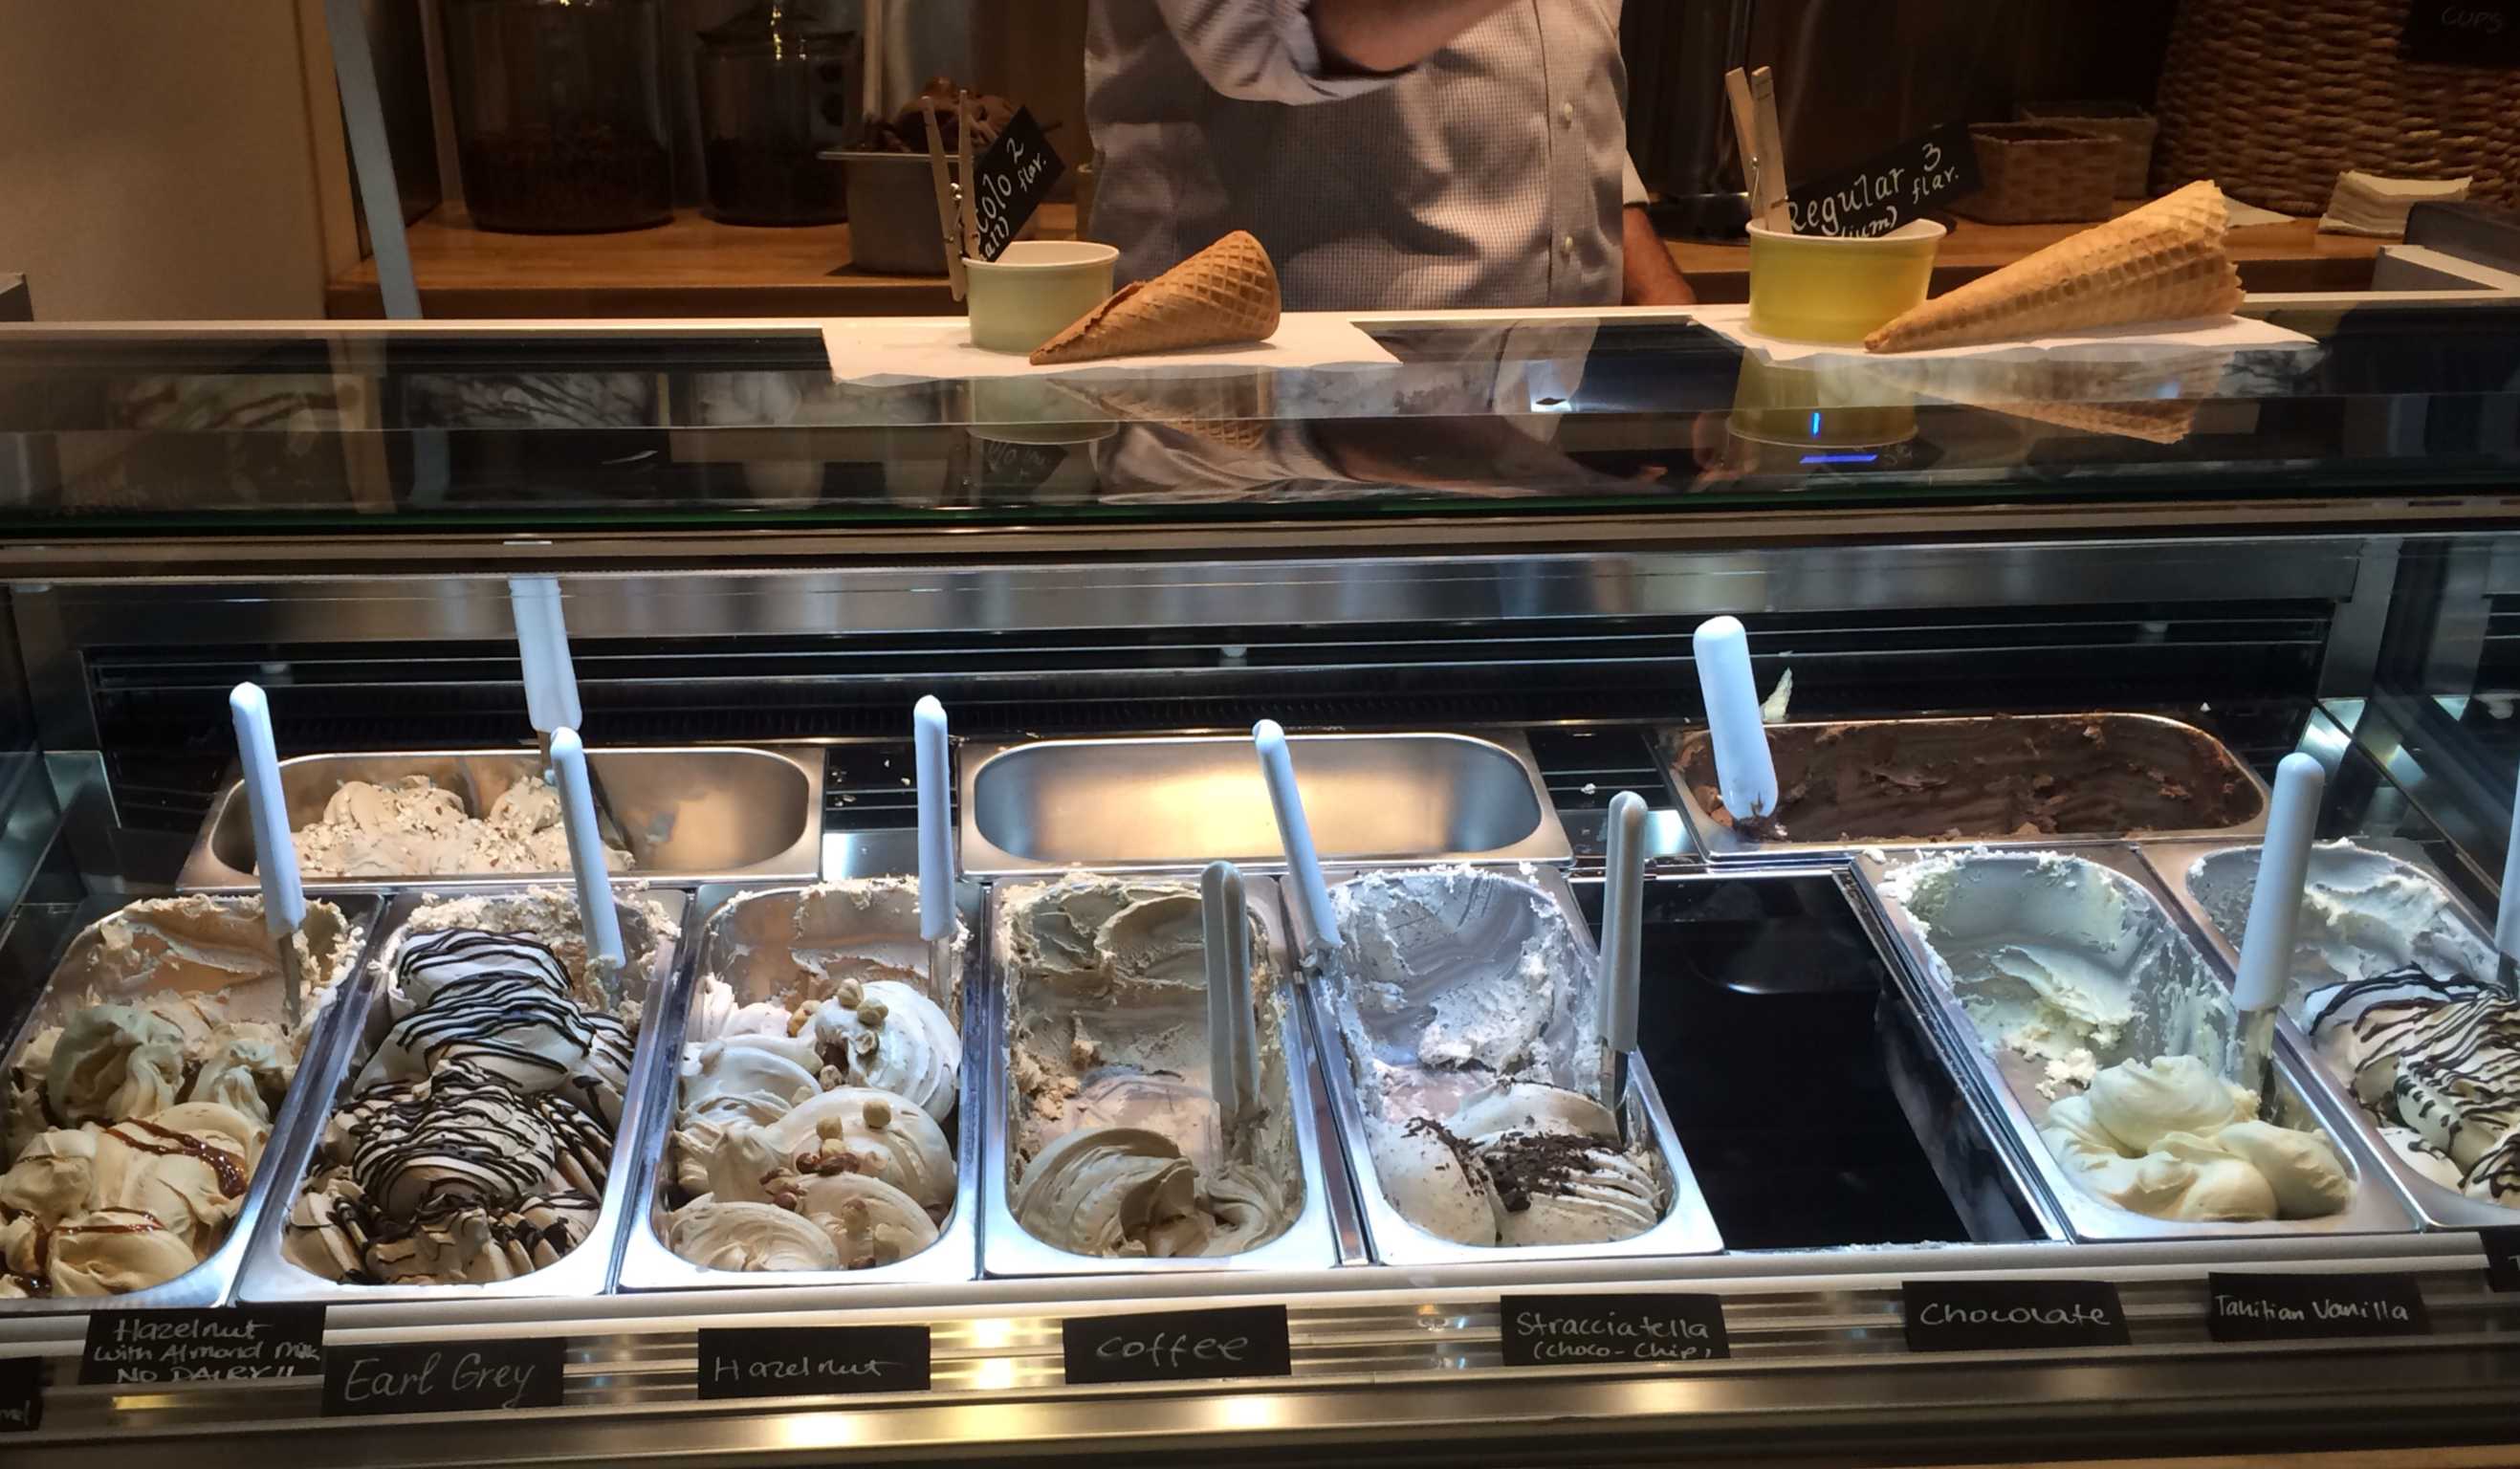 Gelataio displays its various offerings of gelato flavors at the front of the store. Photo by Maddy Jones.